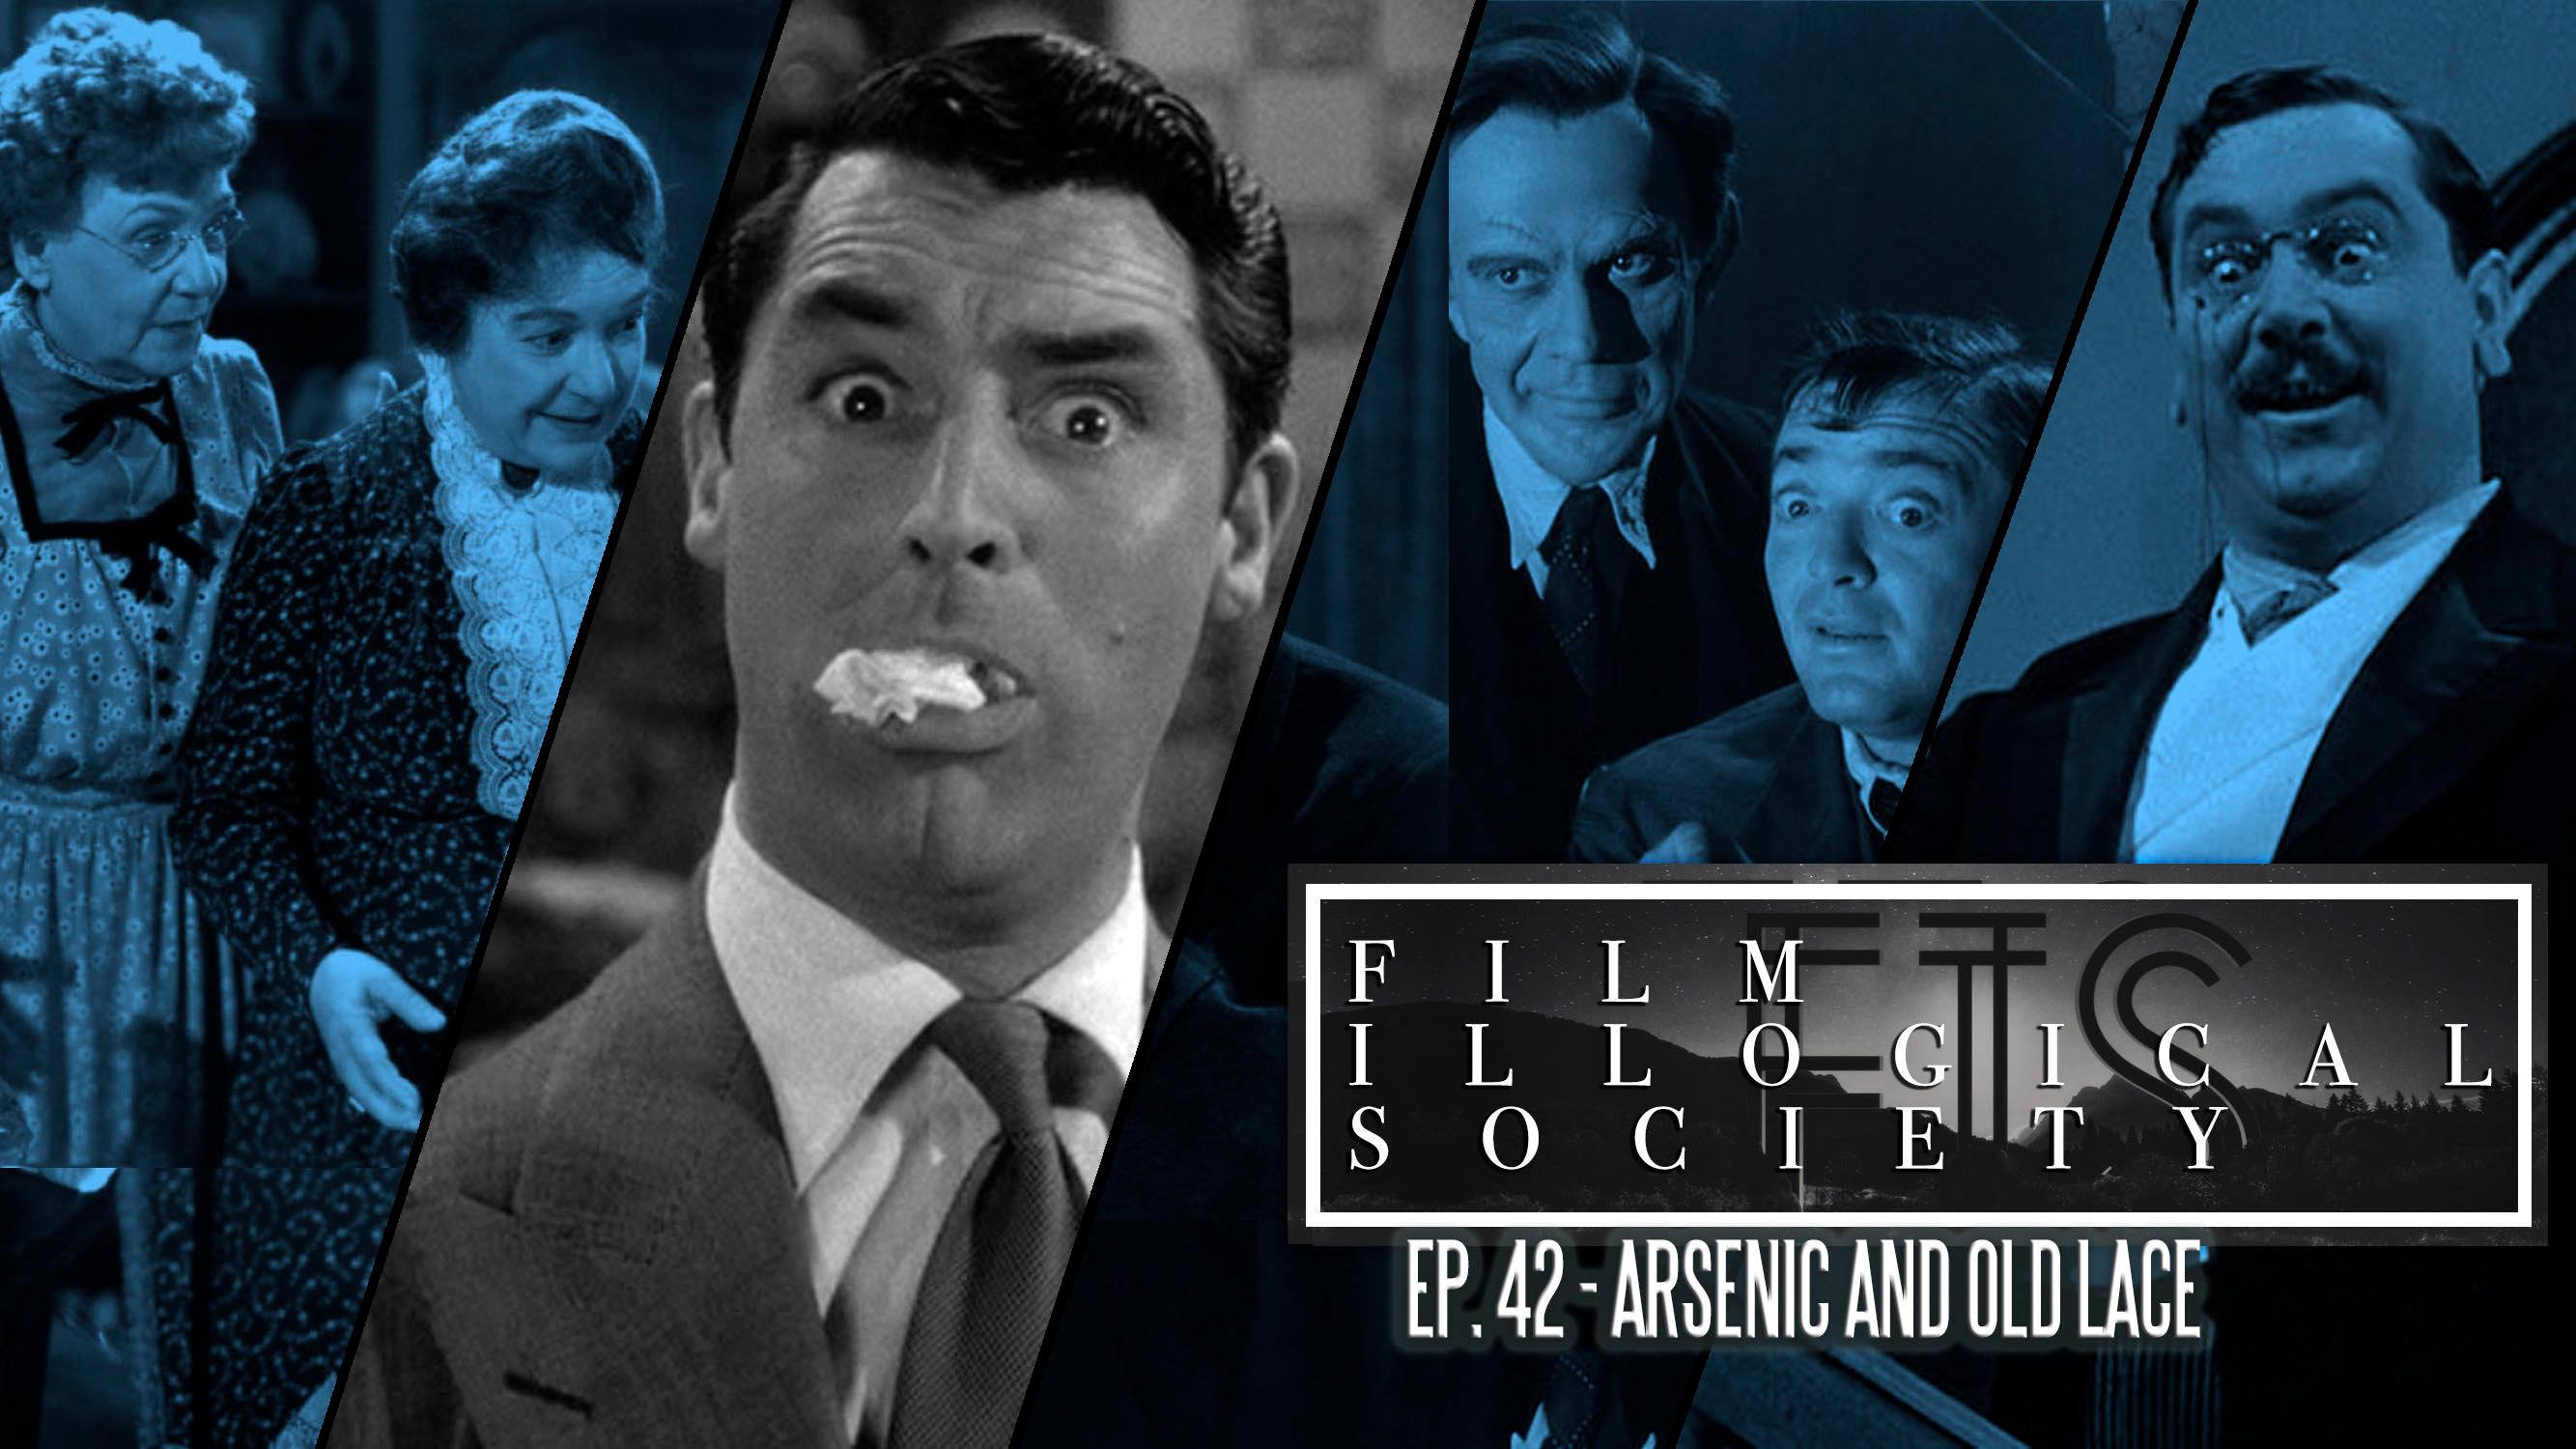 42 – Arsenic and Old Lace